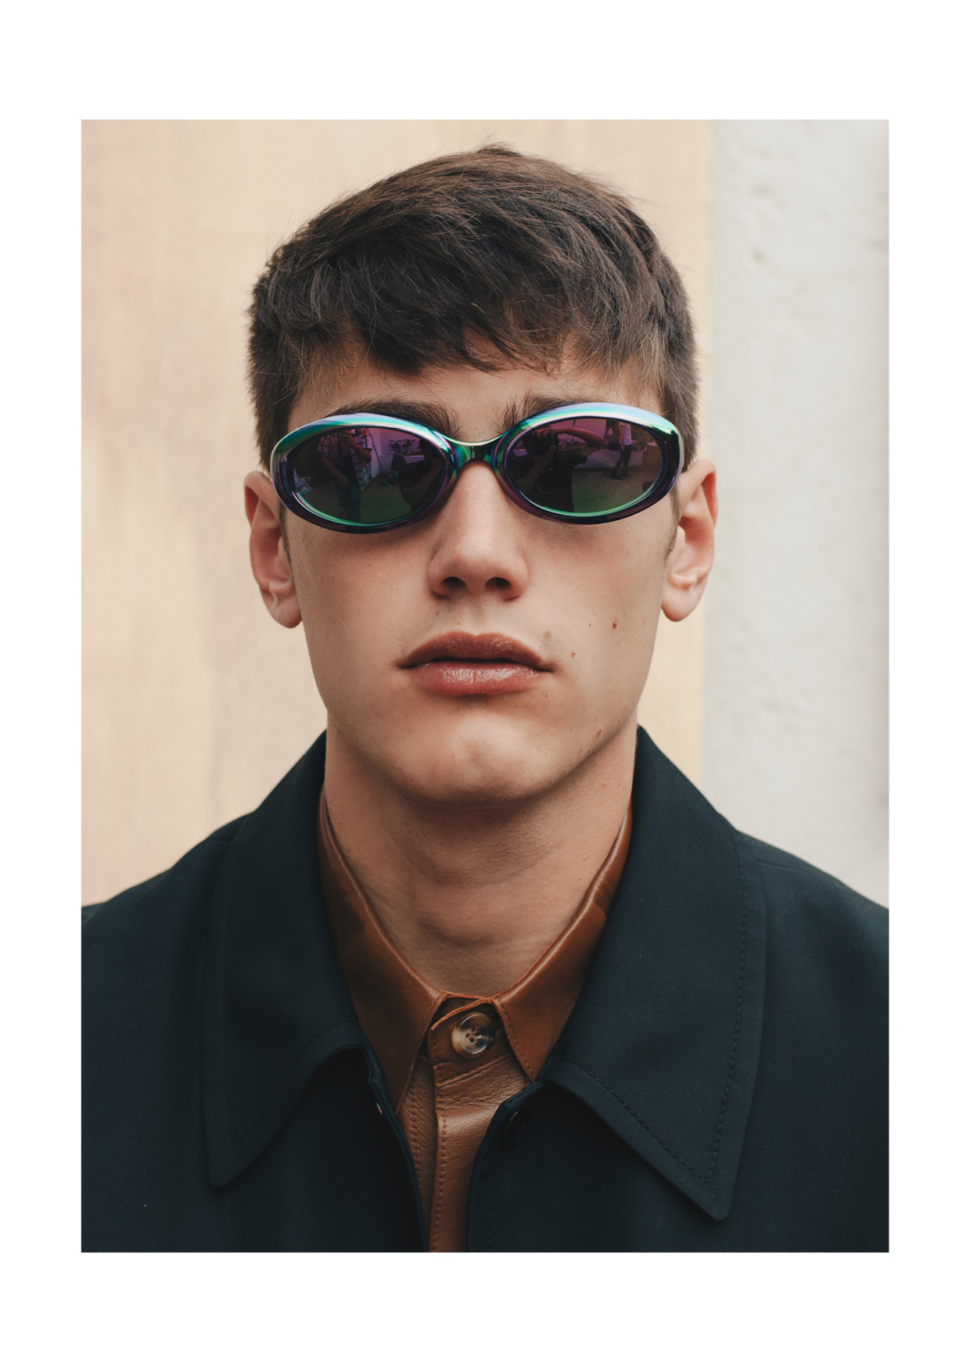 Gino Pasqualini at BANG! Mgmt by Abraham Magos for Client Style #18 ...